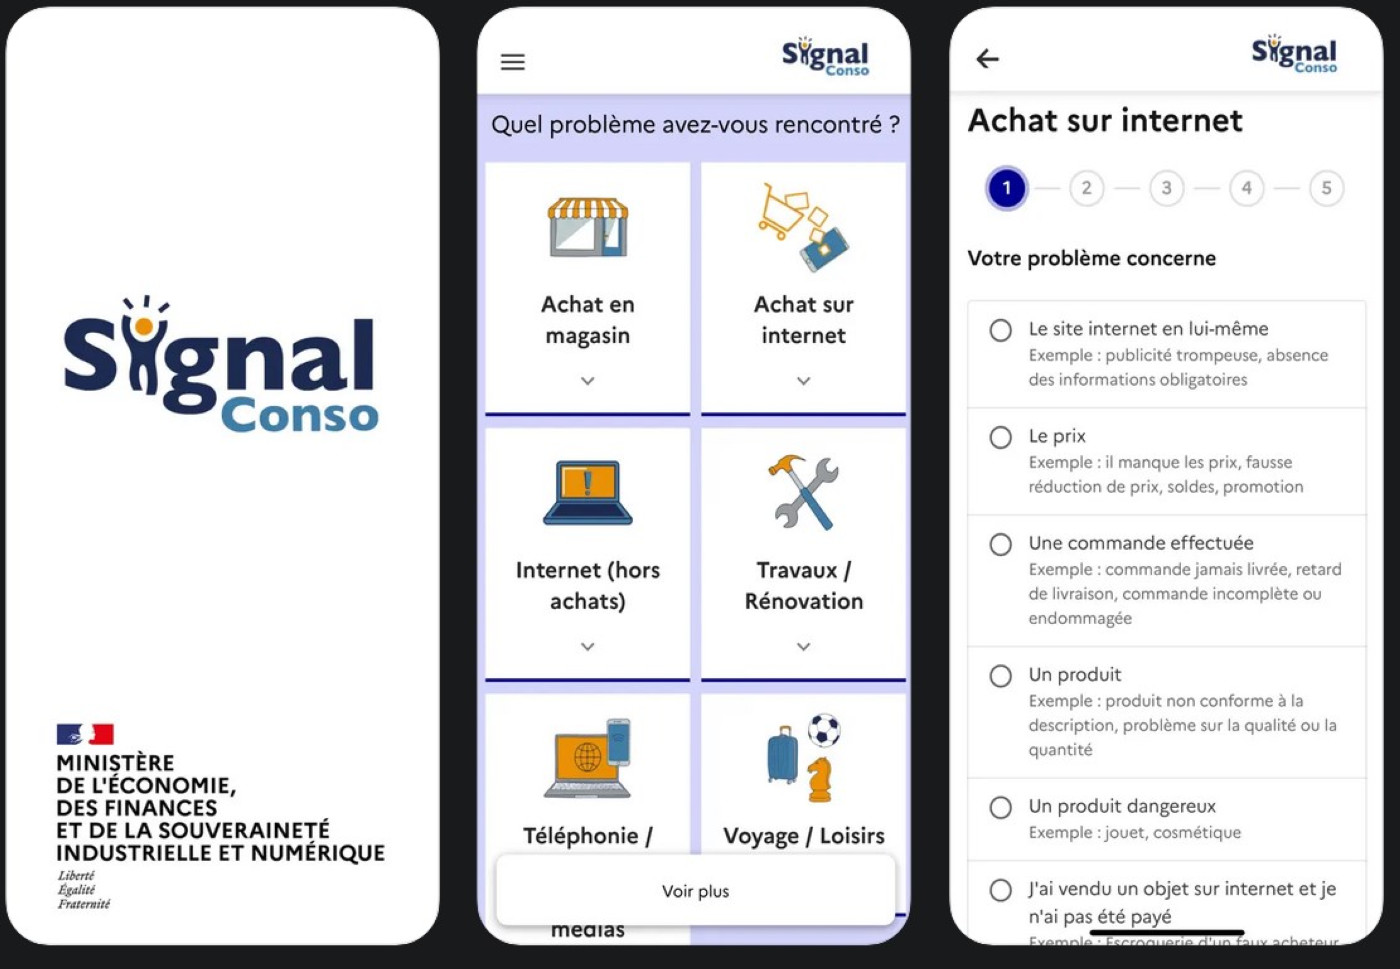 SignalConso launches its iOS/Android app and has recorded 500,000 consumer reports